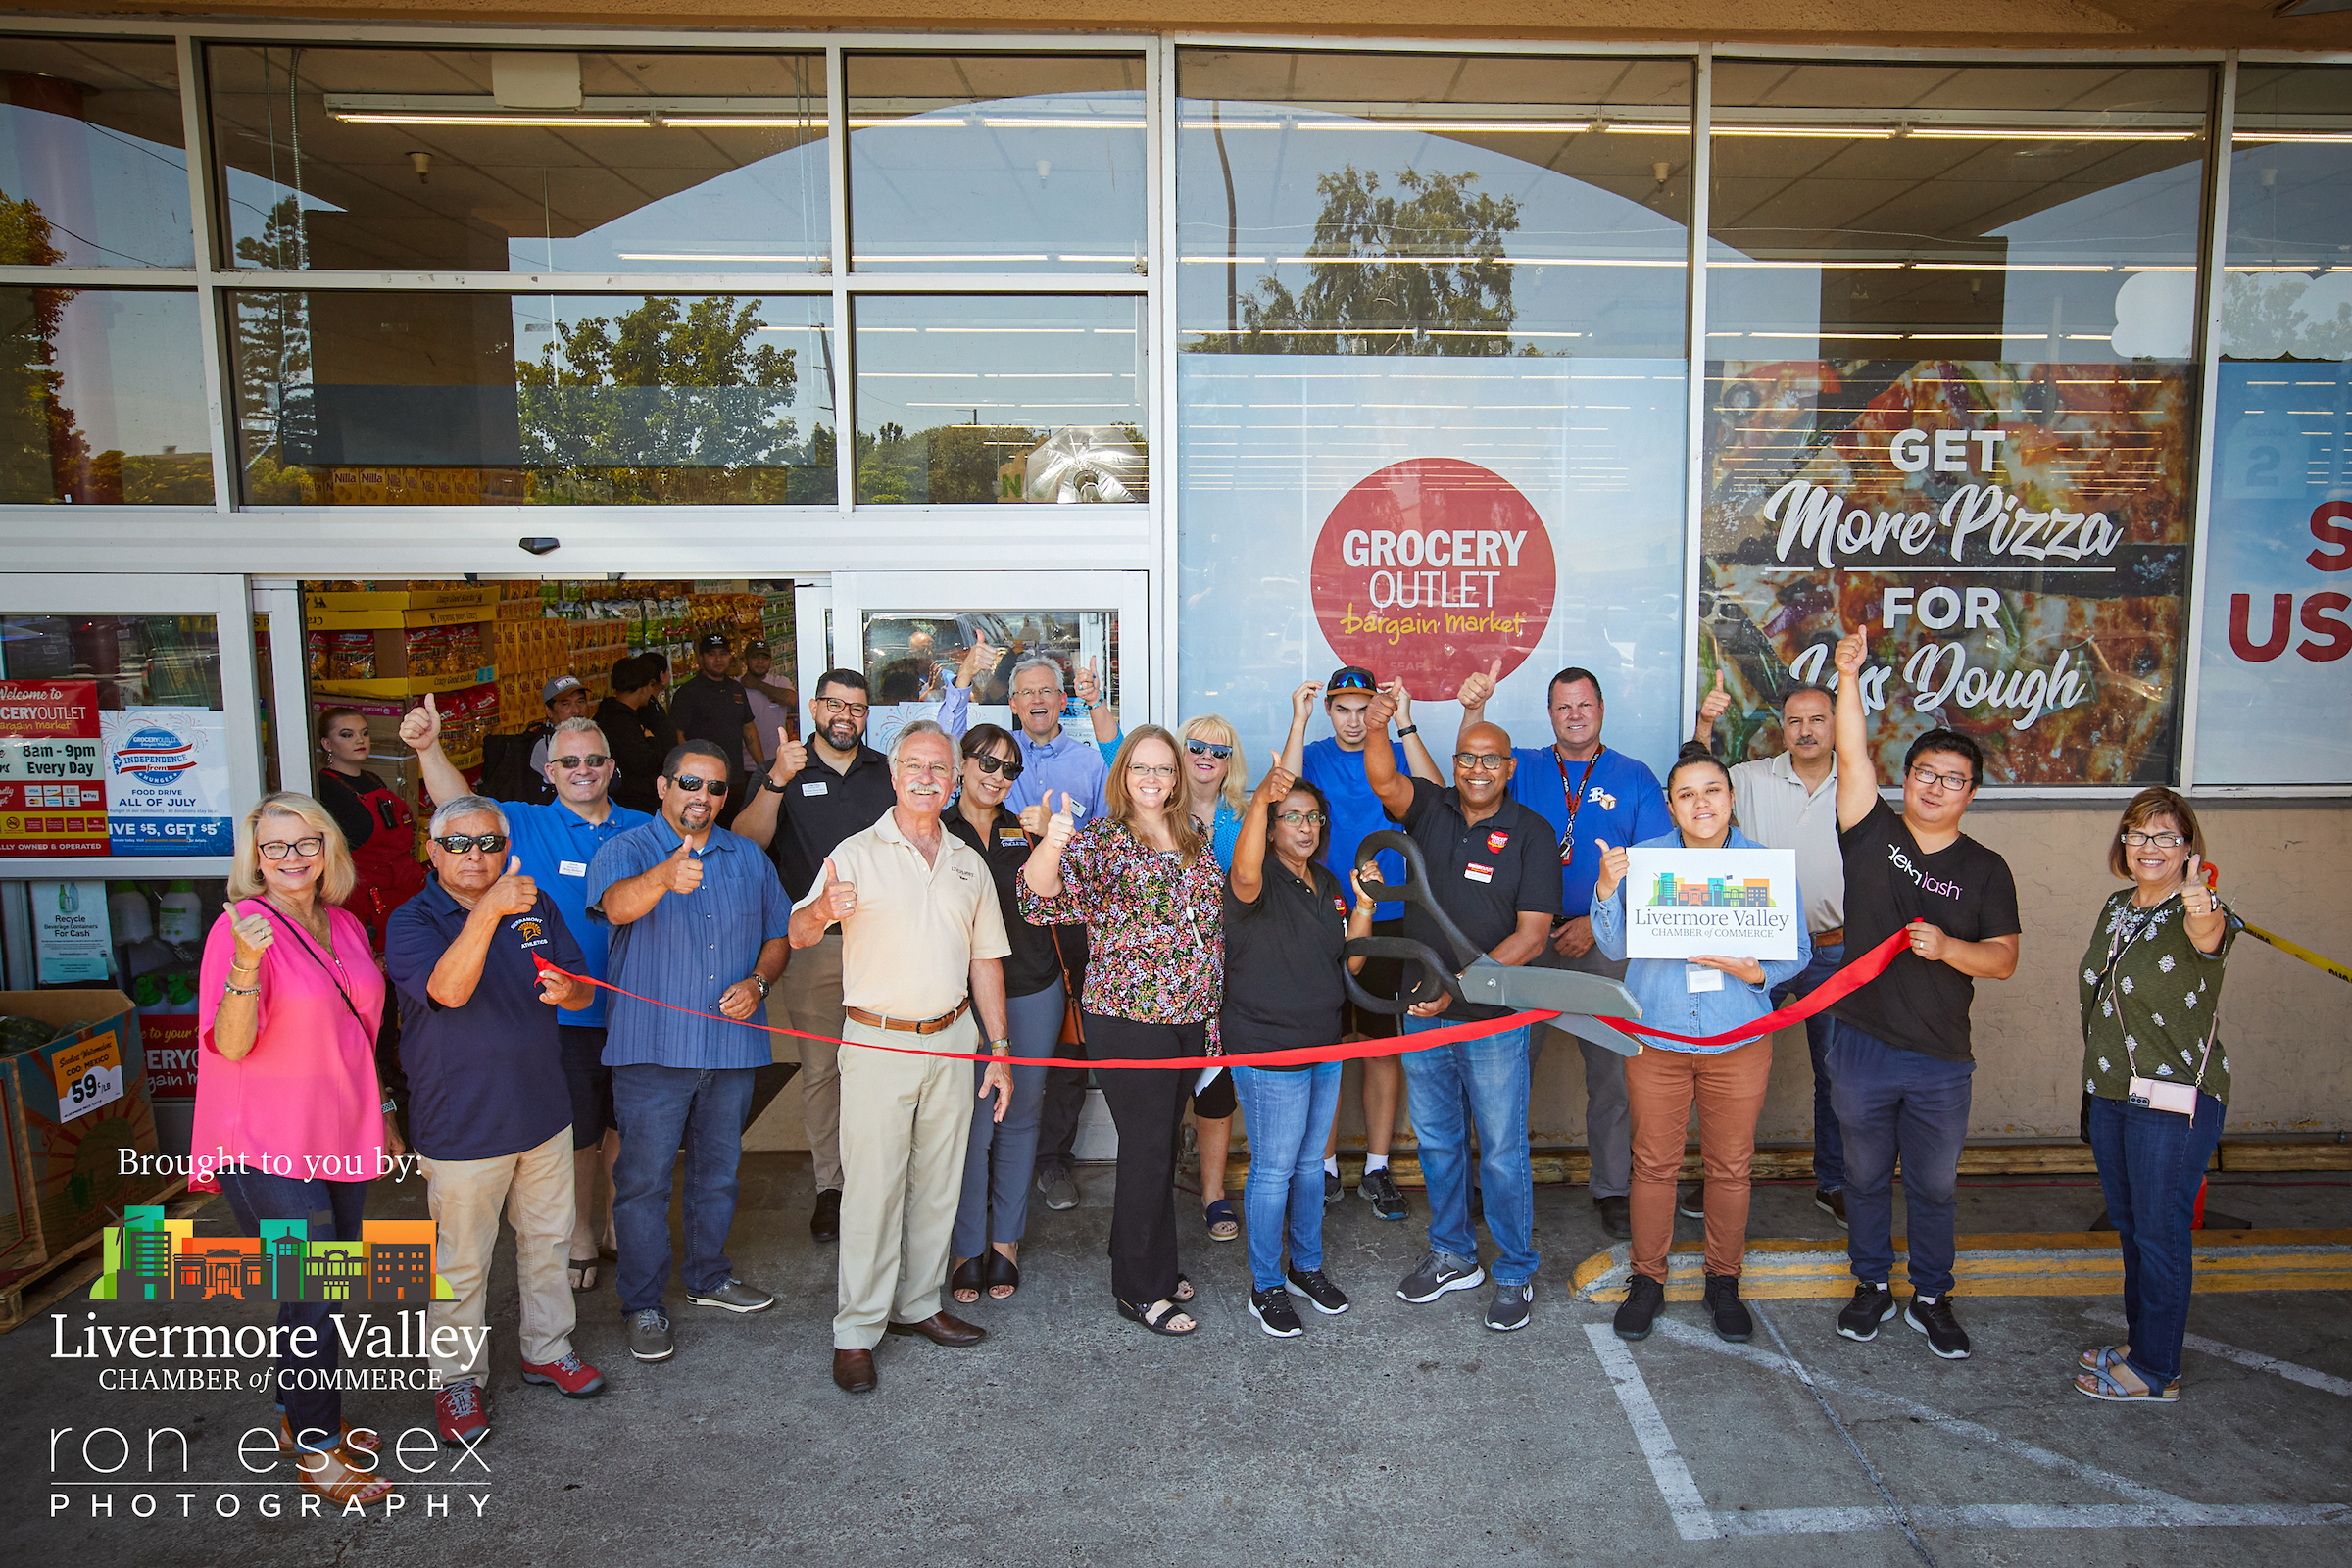 LVCC Welcomes Livermore Grocery Outlet as Newest Member